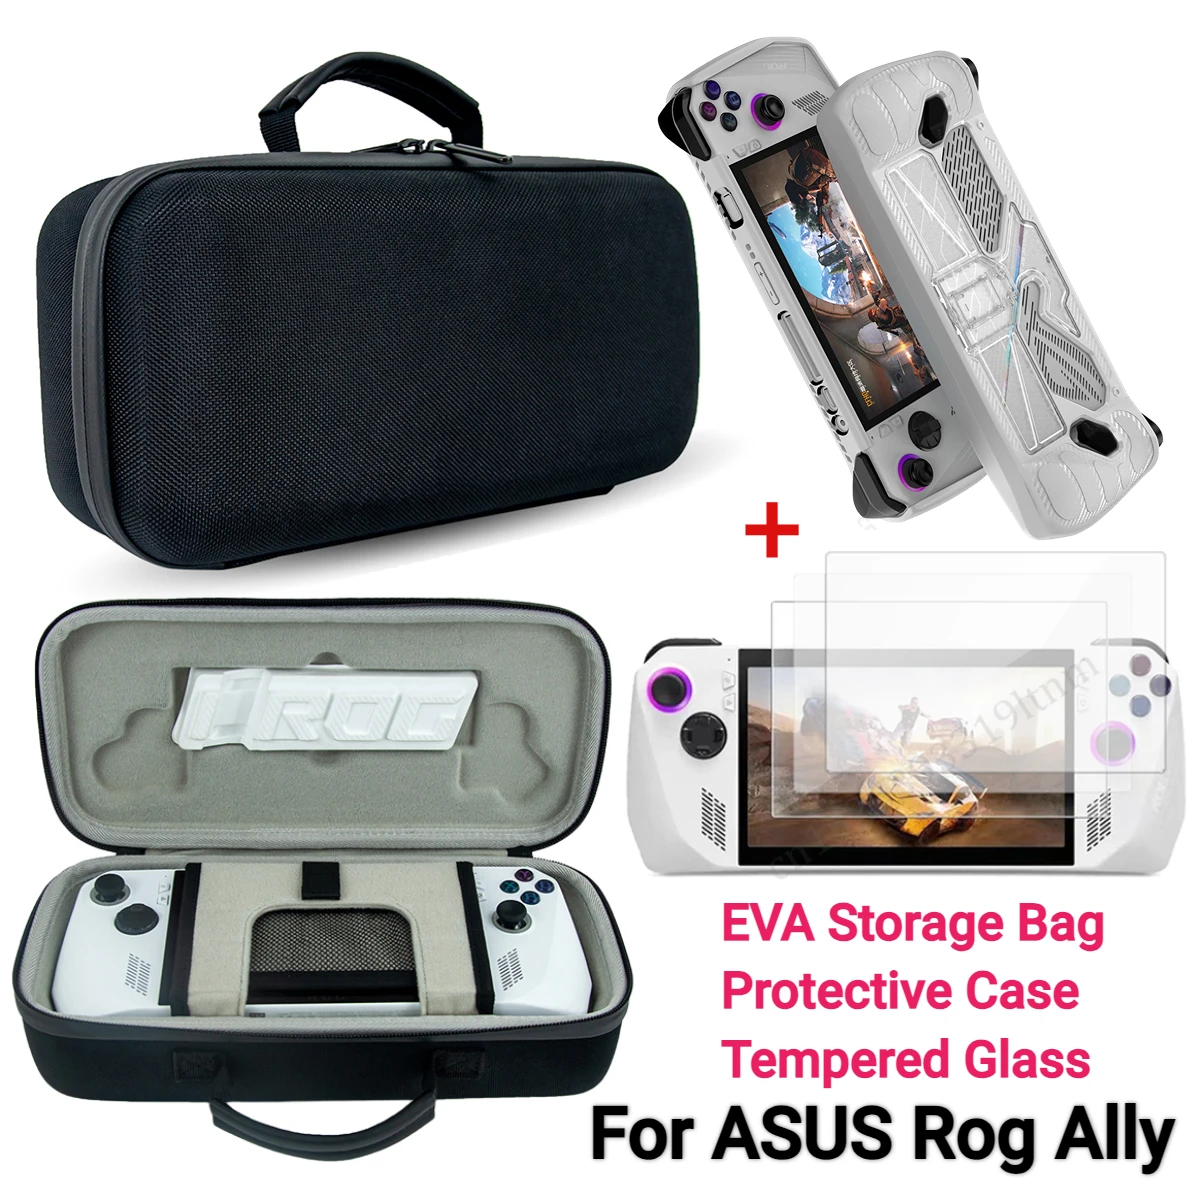 https://ae01.alicdn.com/kf/S7da5680cf95e46afb94b6d50e5447e49W/Portable-Carrying-Case-Bag-for-Asus-ROG-Ally-Console-Storage-Bags-Shockproof-Hard-EVA-Protective-Cover.jpg